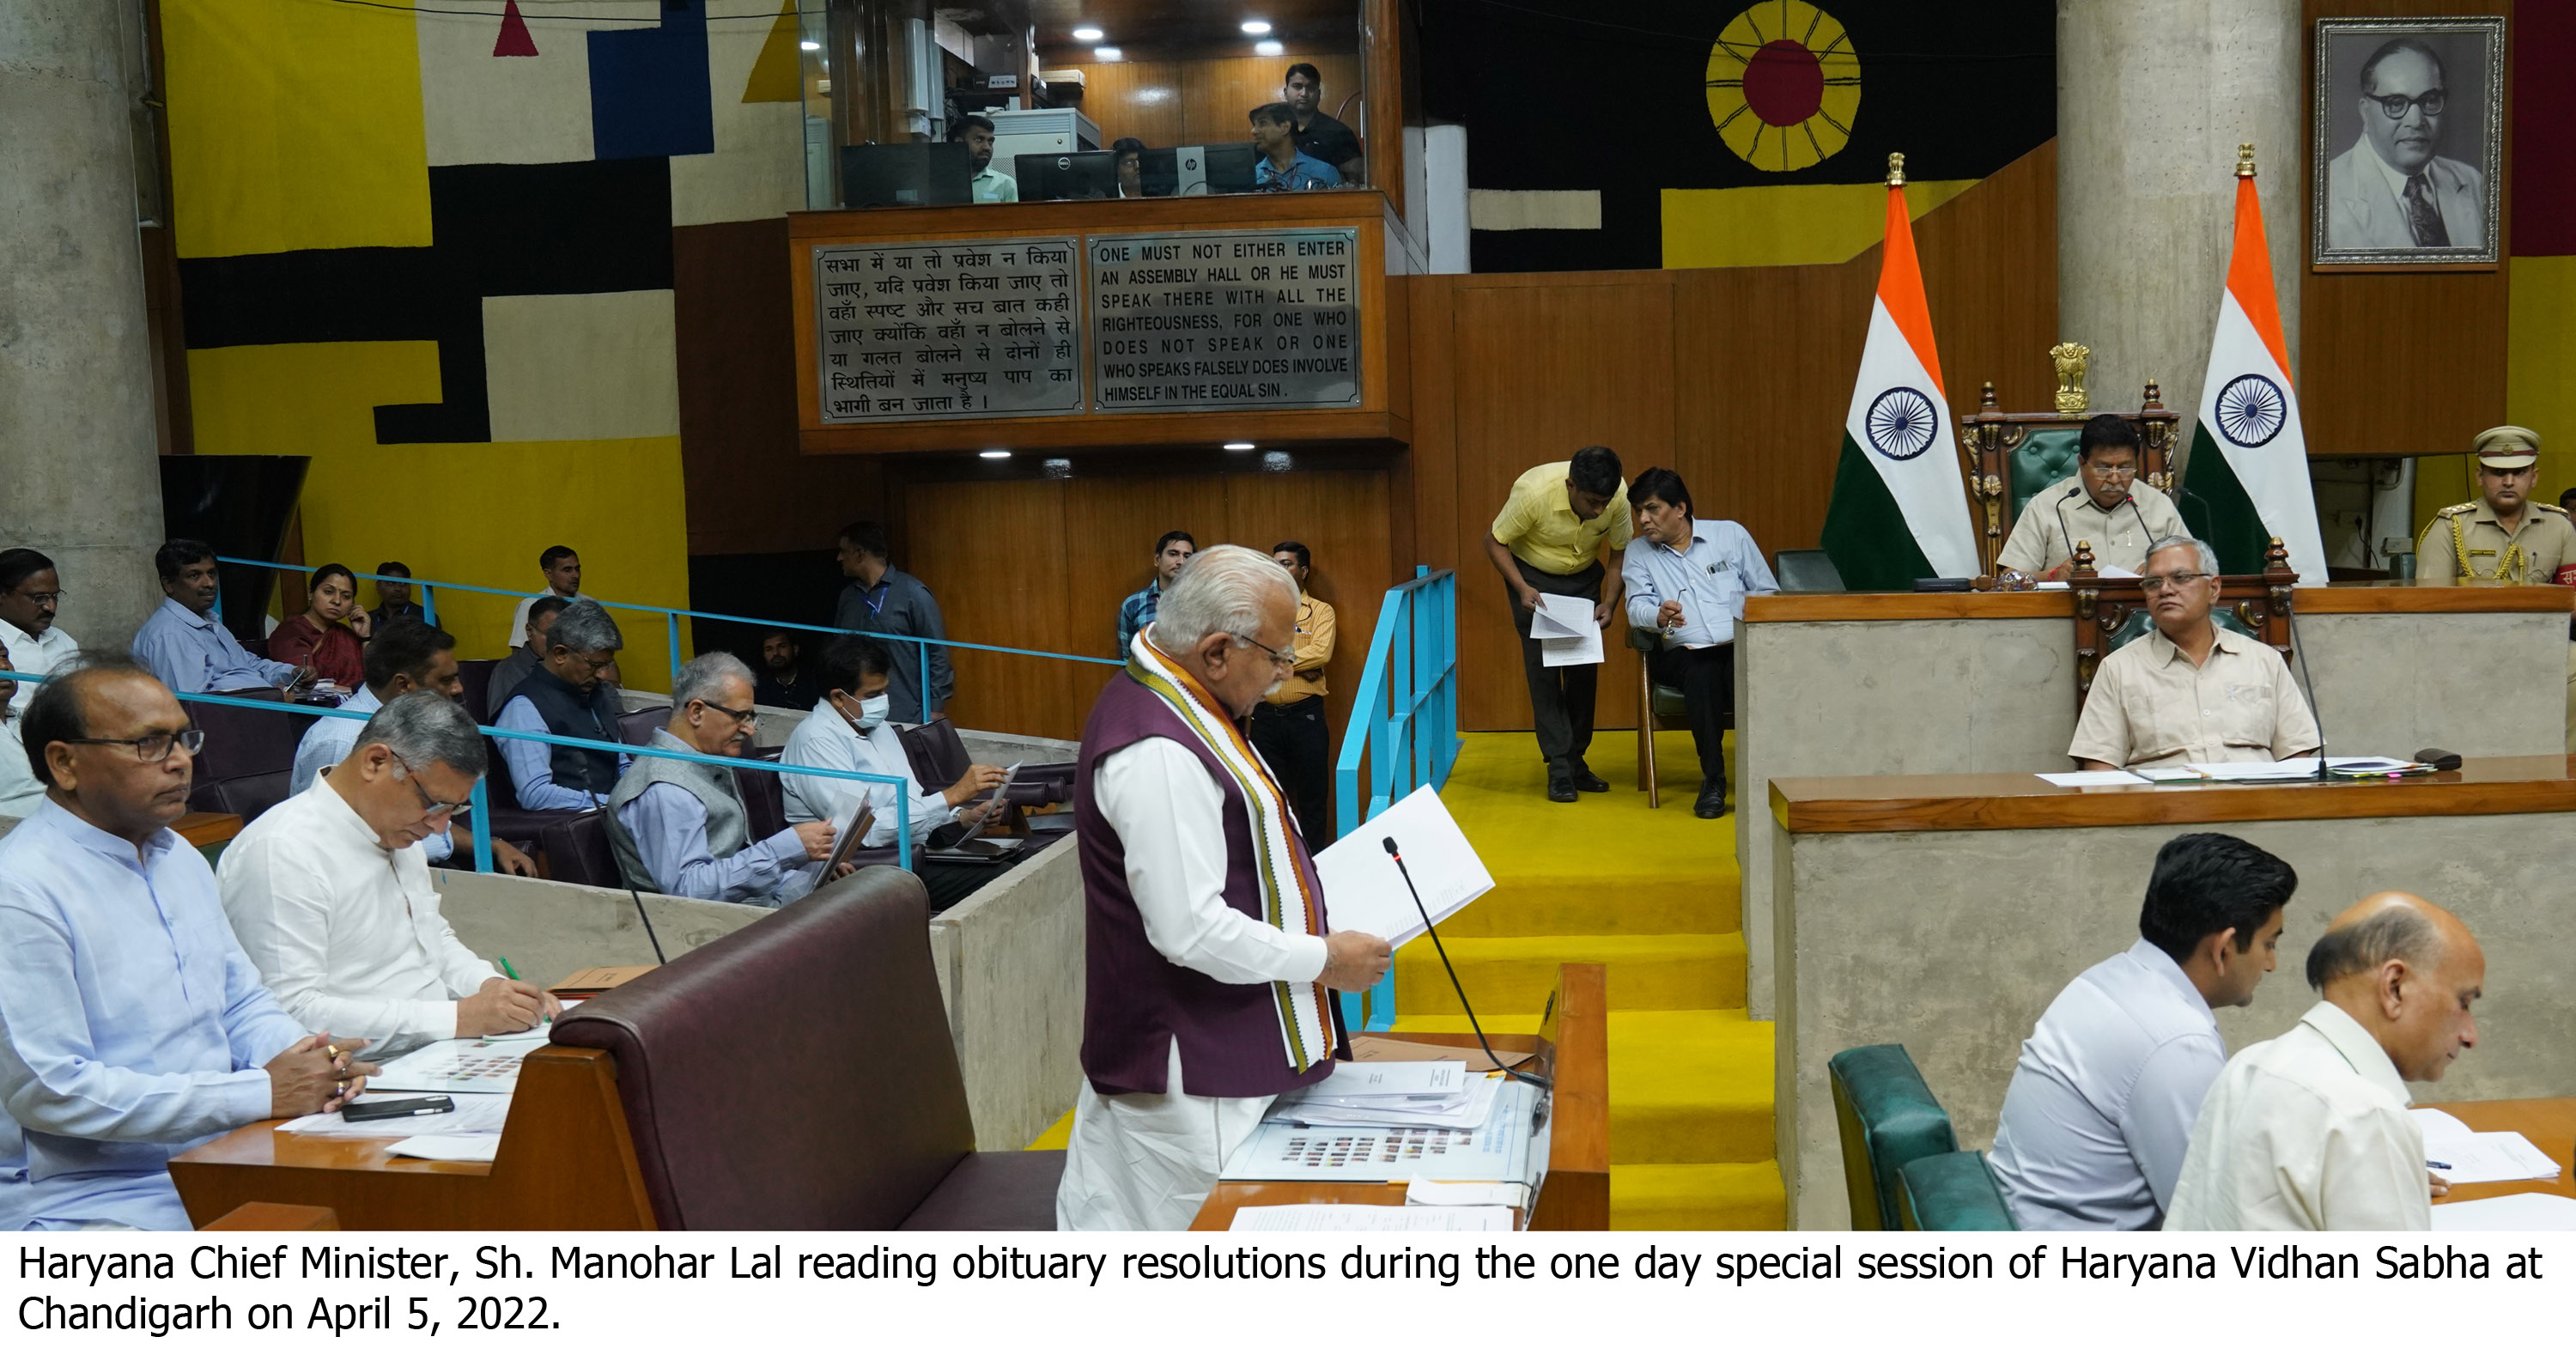  Haryana Assembly resolution stakes claim over Chandigarh, demands SYL   